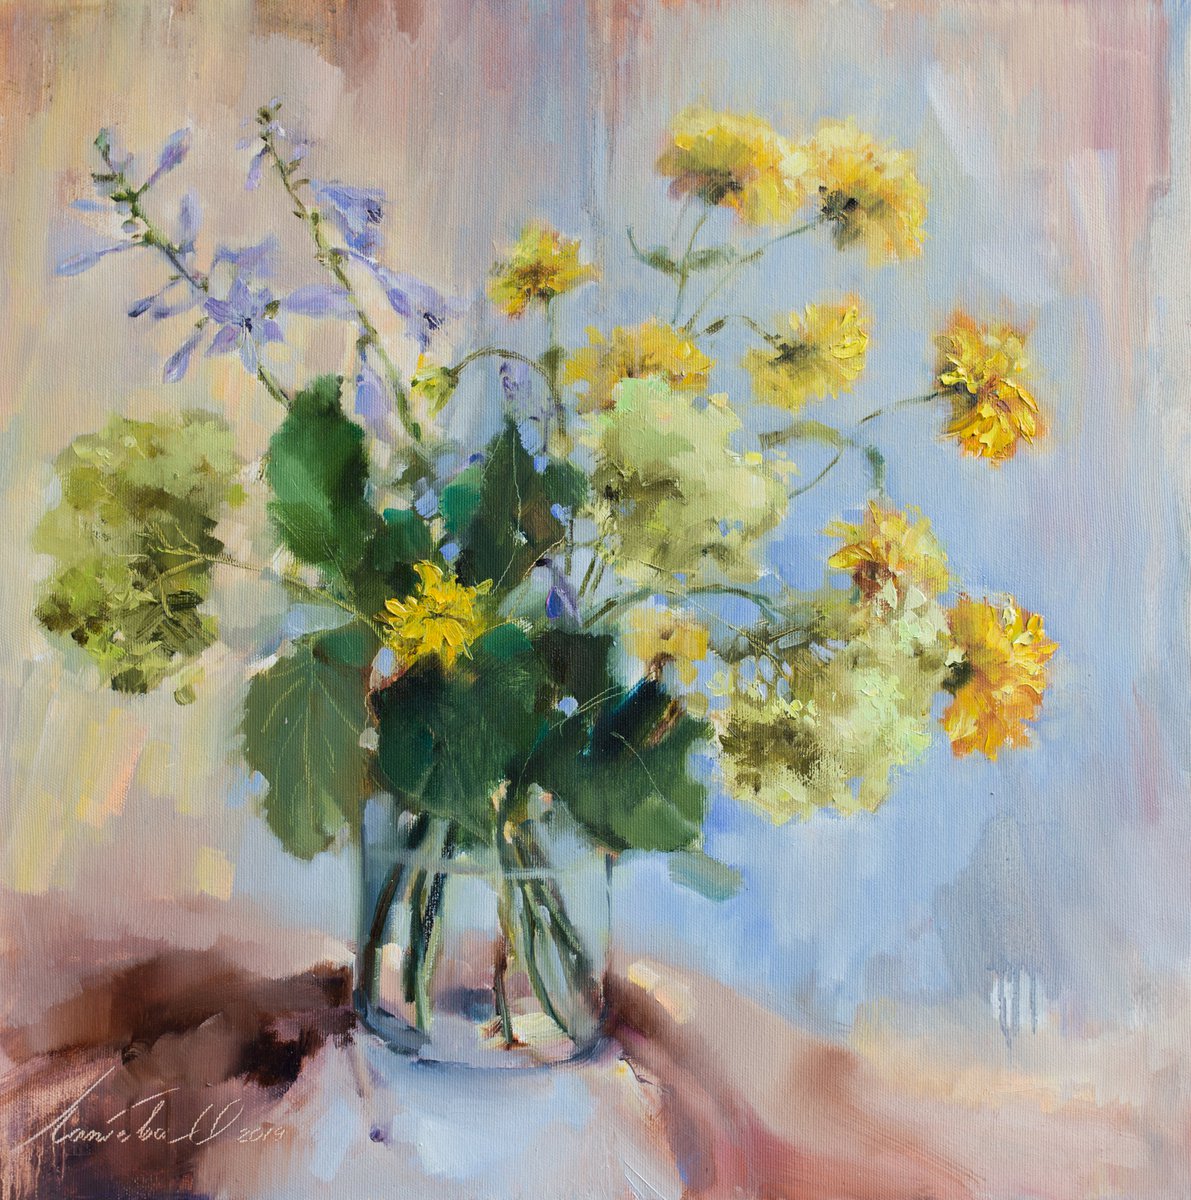 The sun is made up of flowers on my canvas by Olha Laptieva